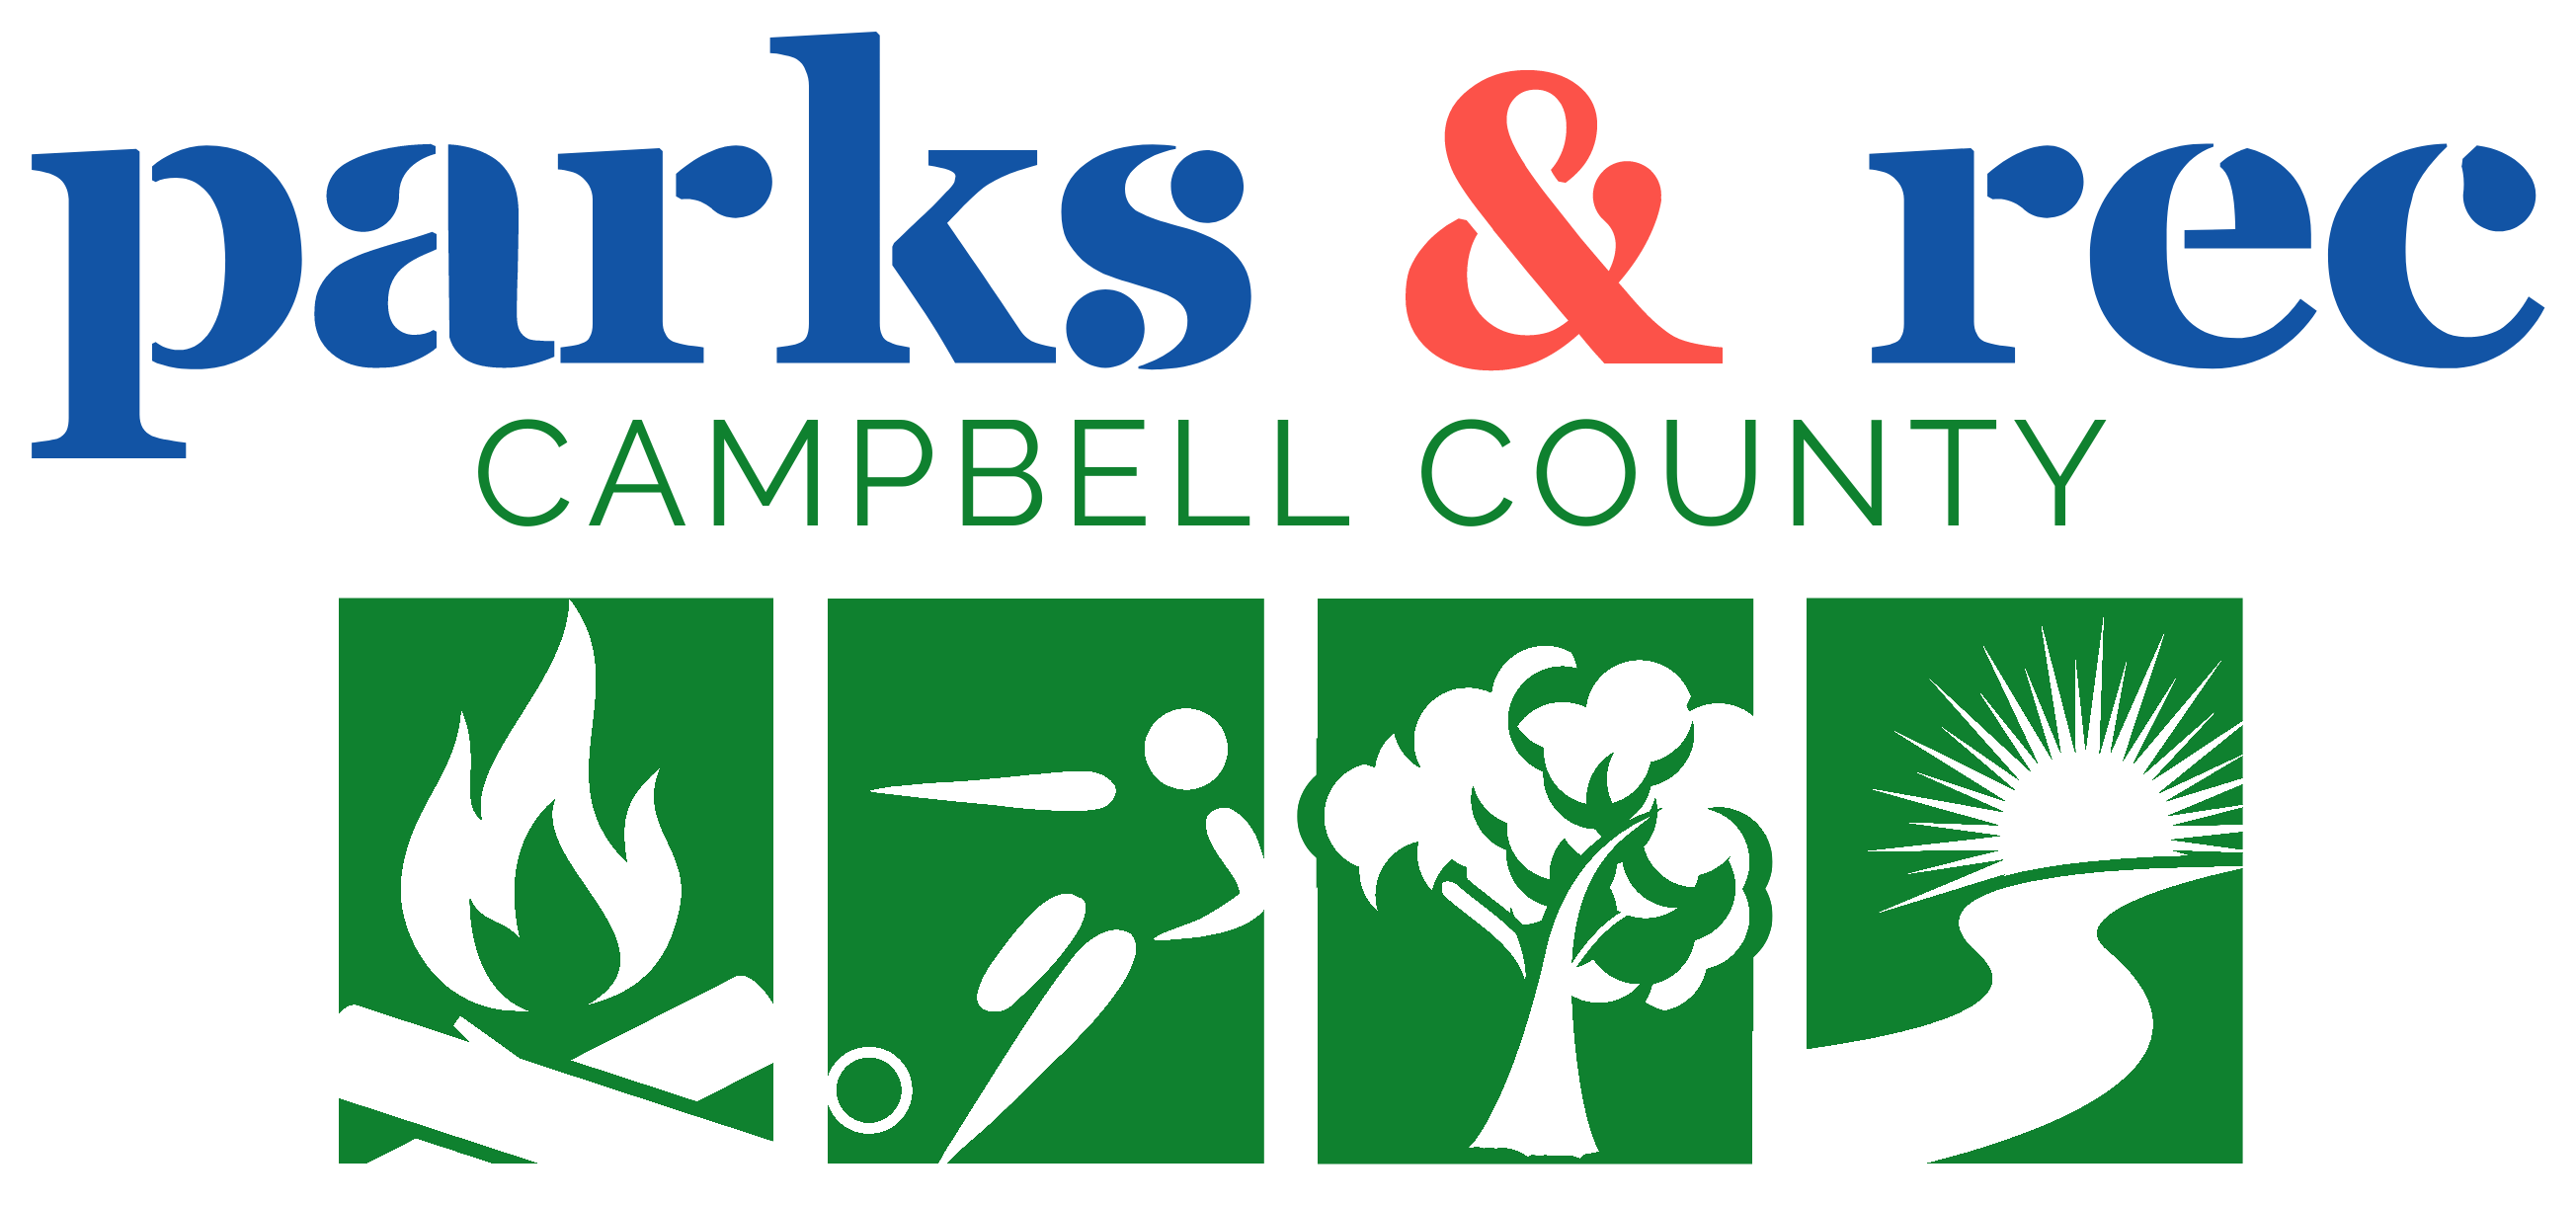 Campbell County Parks and Recreation